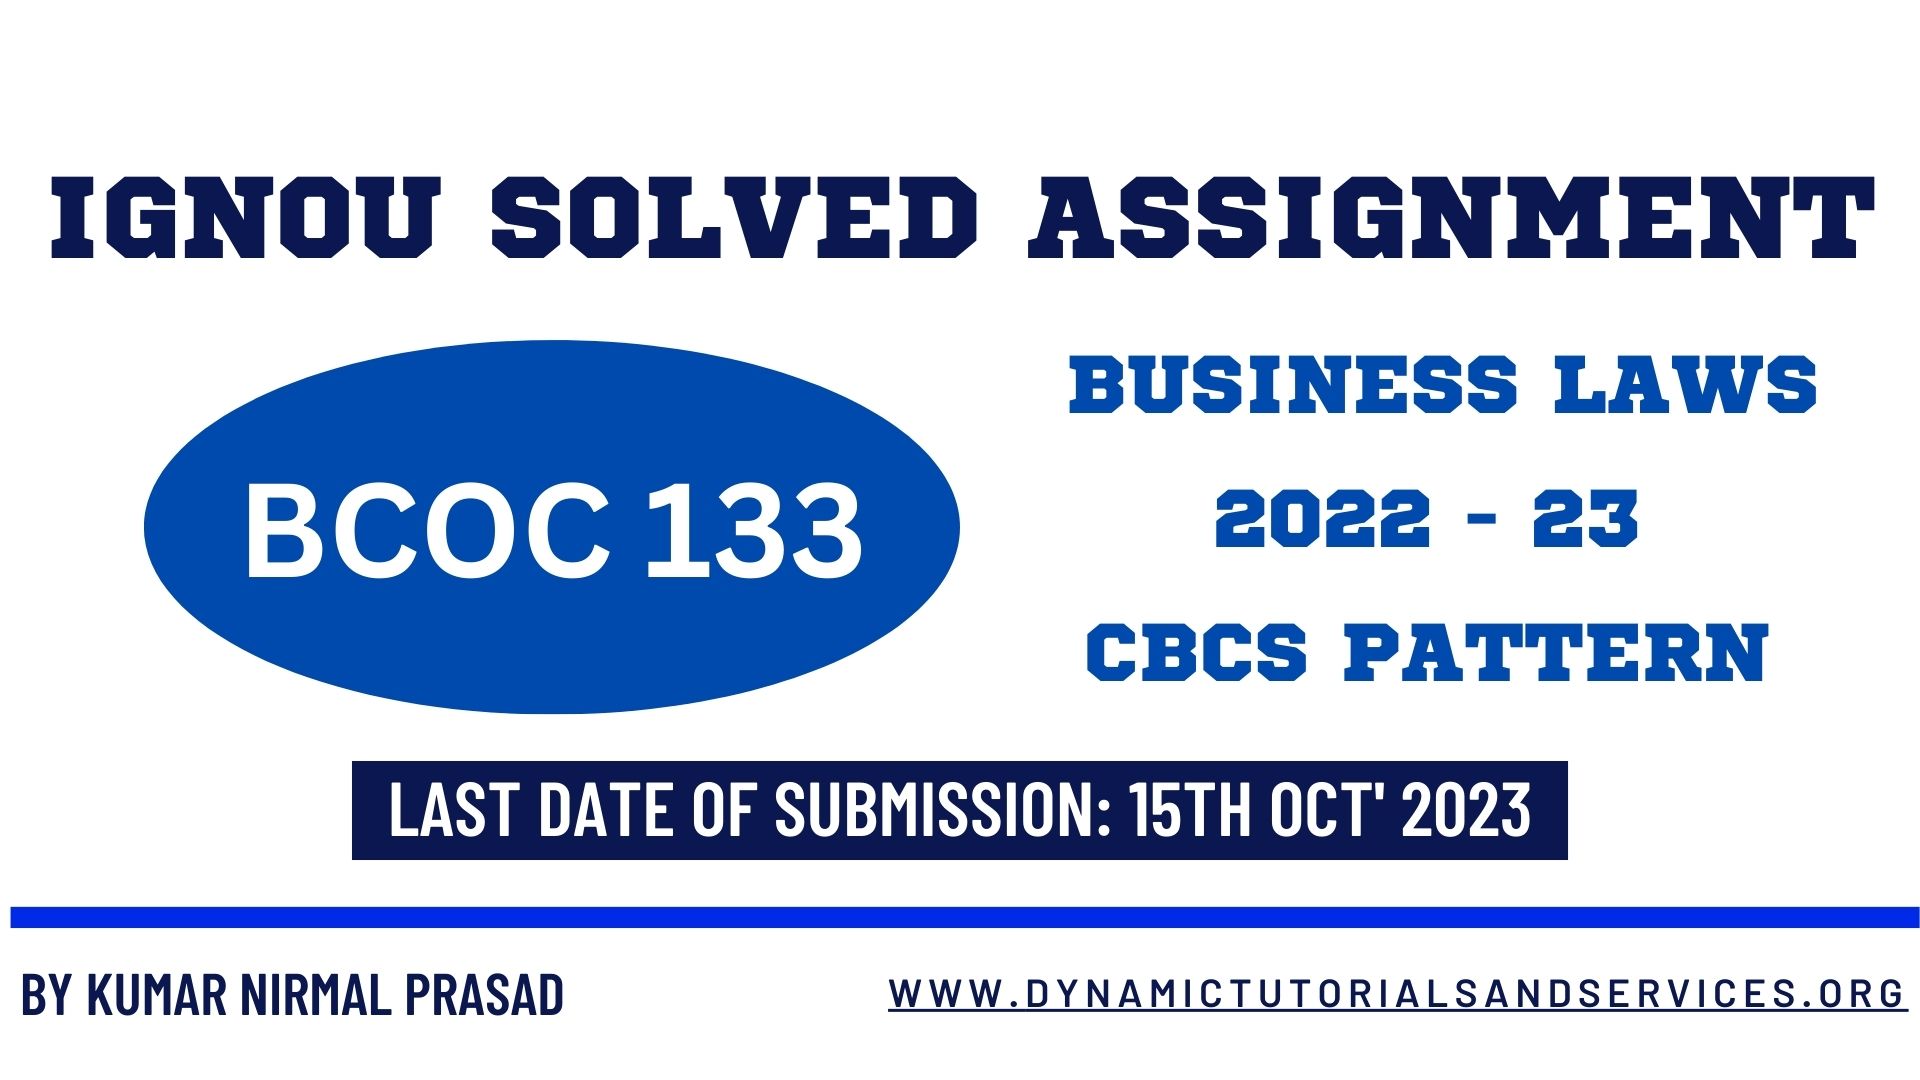 BCOC 133 Business Laws Solved Assignment 2022 - 23